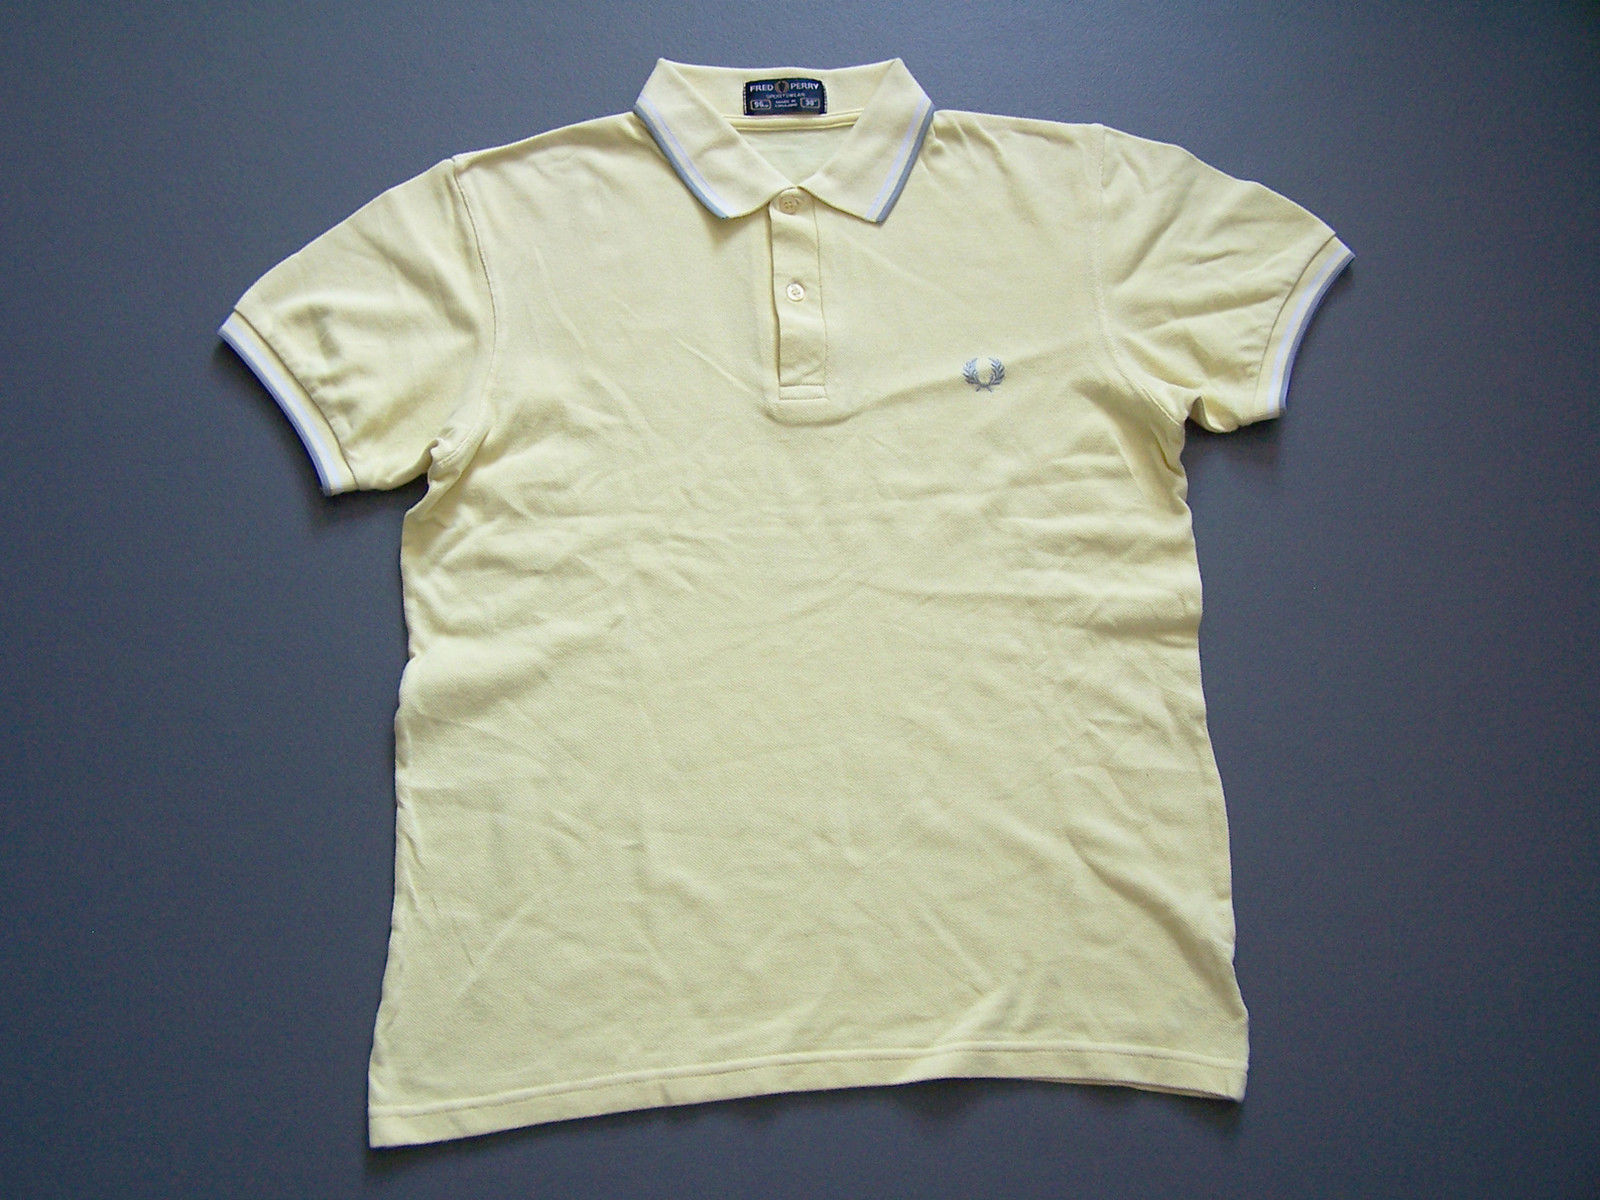 Fred Perry Polo Shirt Men's Yellow Vintage Itax076 - Polo Shirt ...